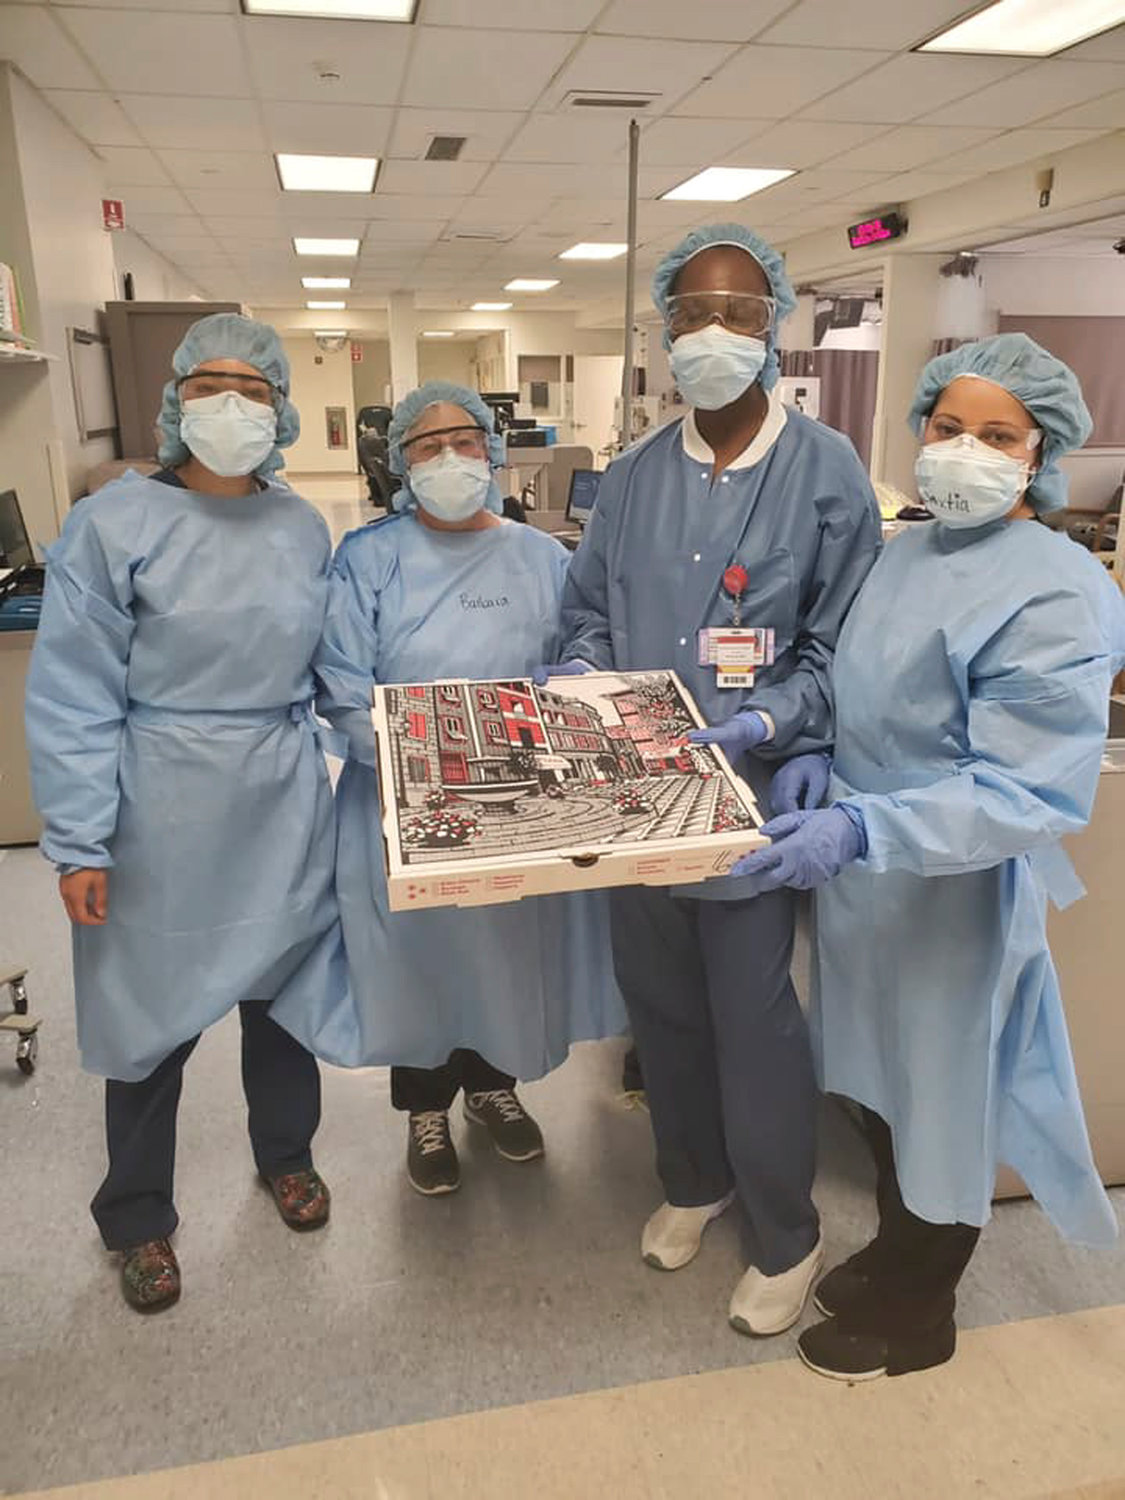 Valley Streamer Kevin Aburto had pizza delivered to the doctors and nurses at the intensive care unit at LIJ Valley Stream with funds that he raised on GoFundMe.